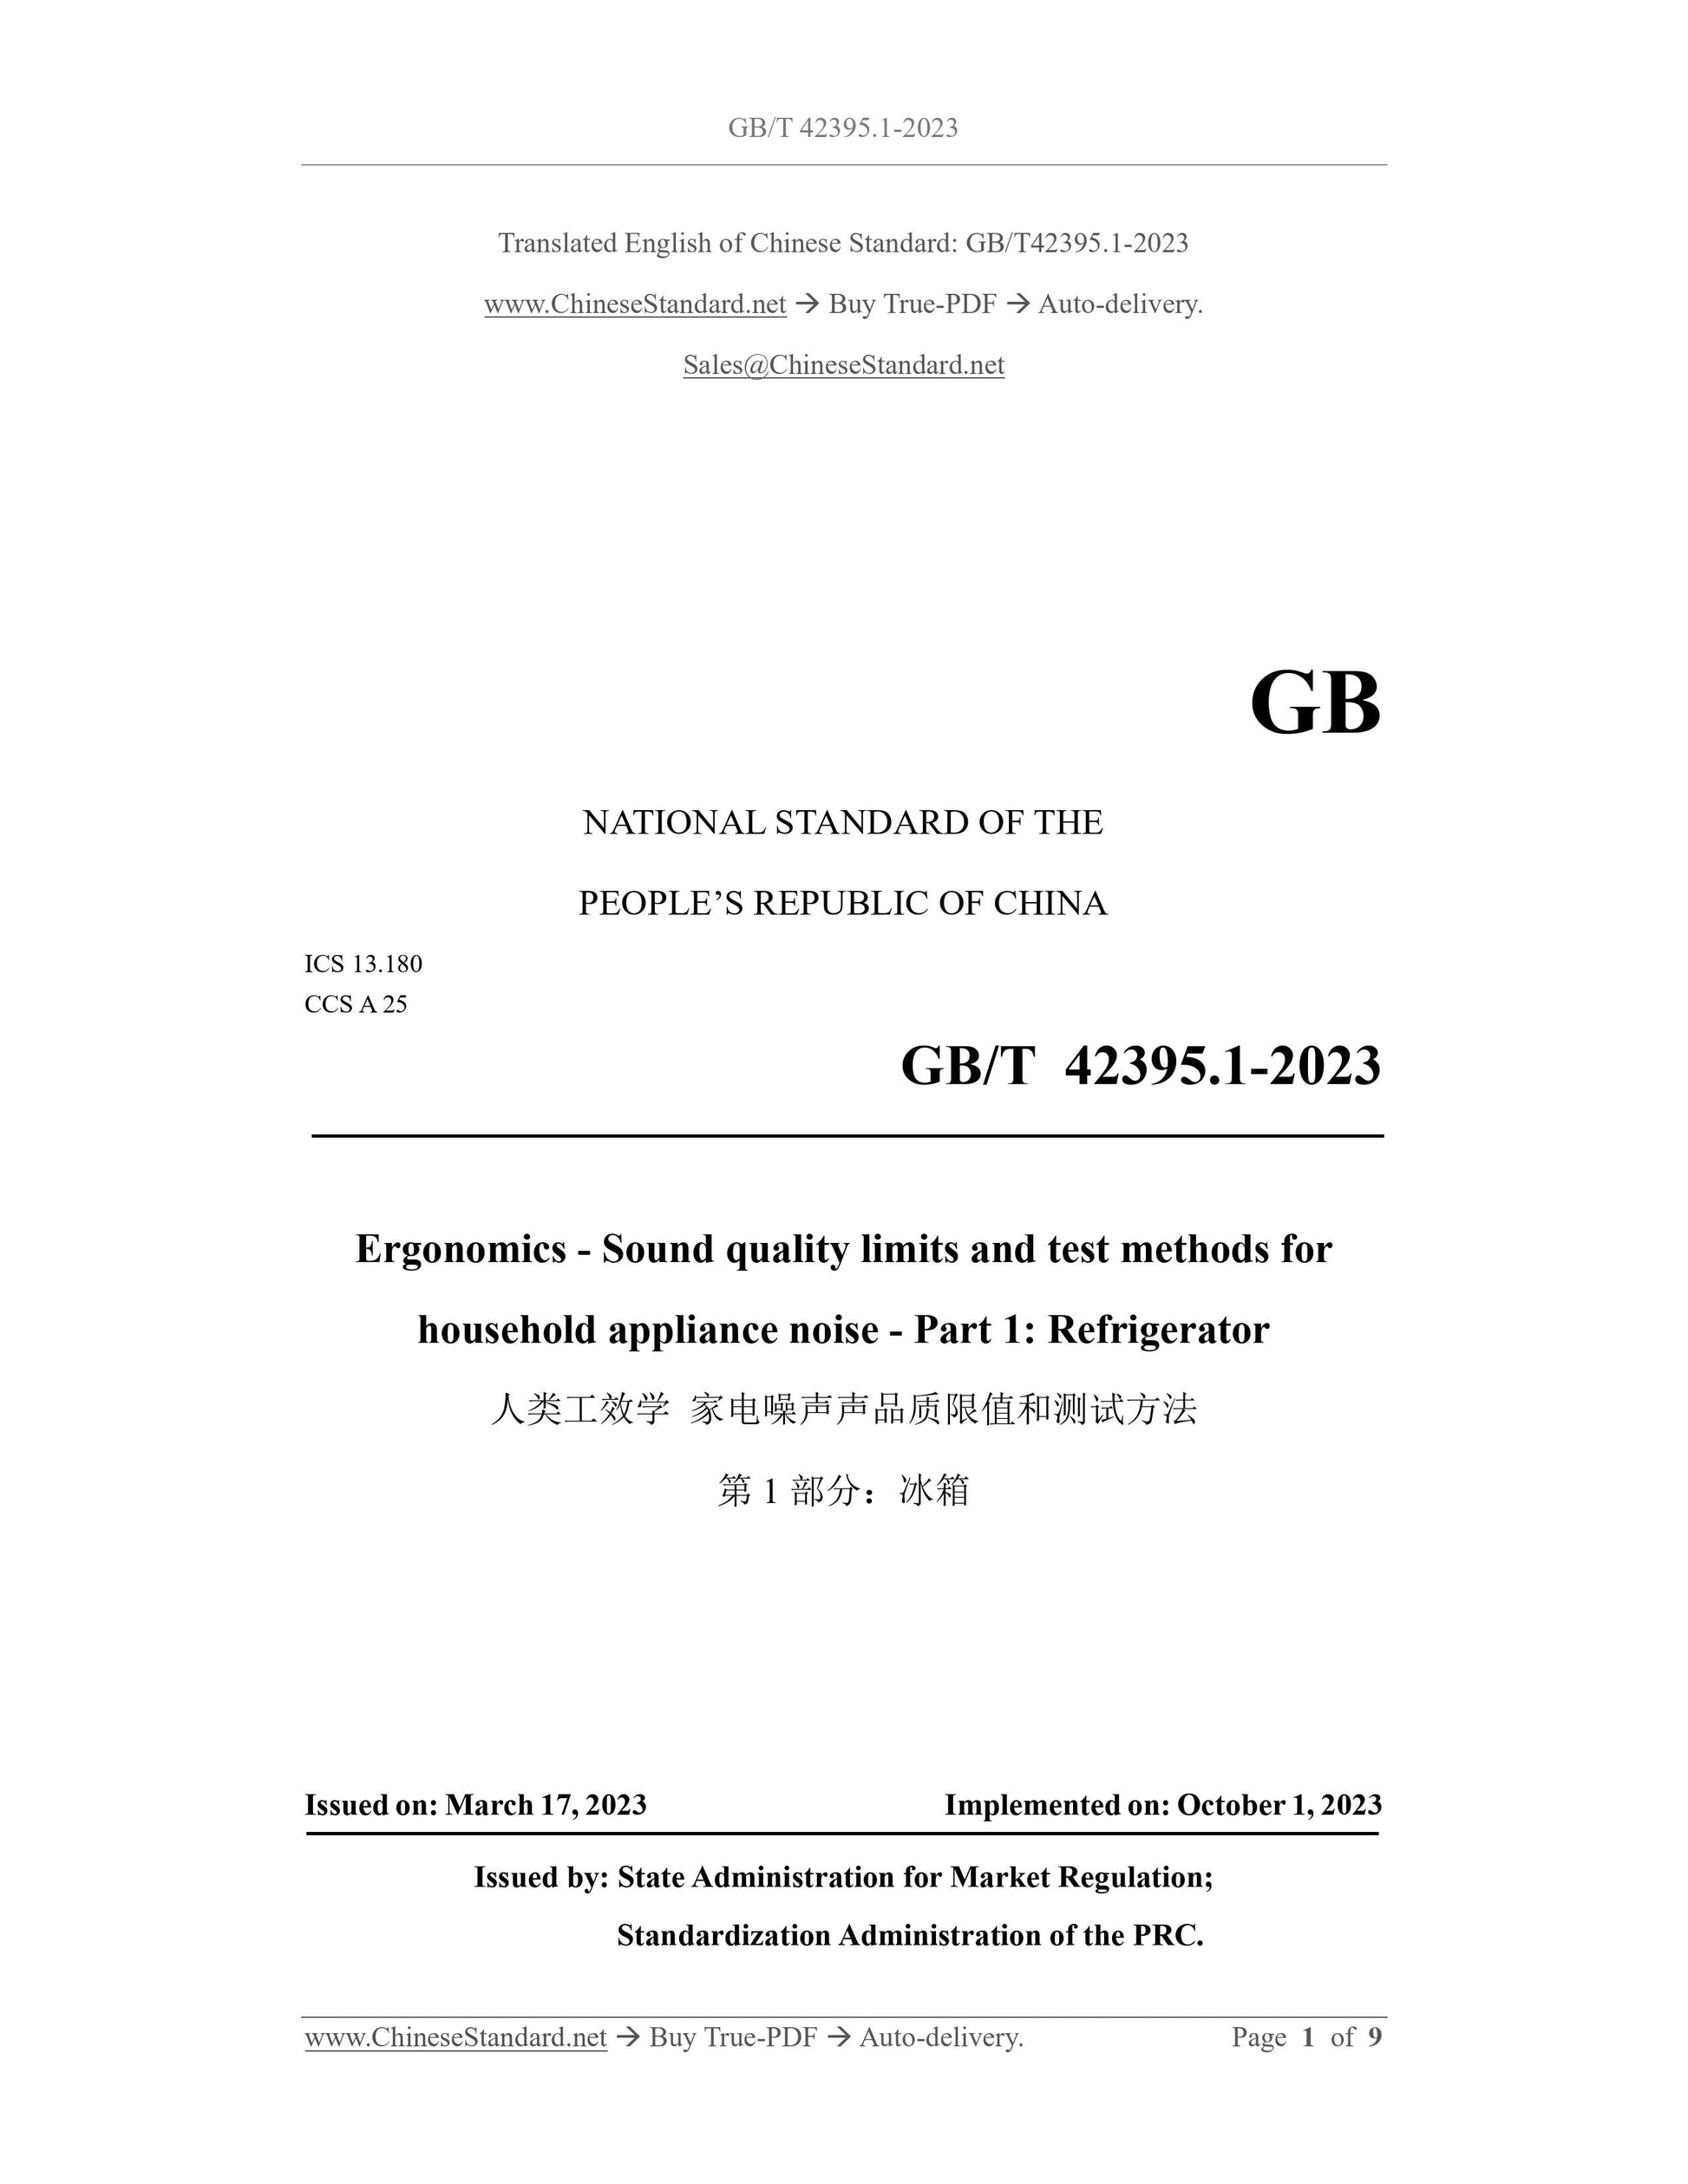 GB/T 42395.1-2023 Page 1